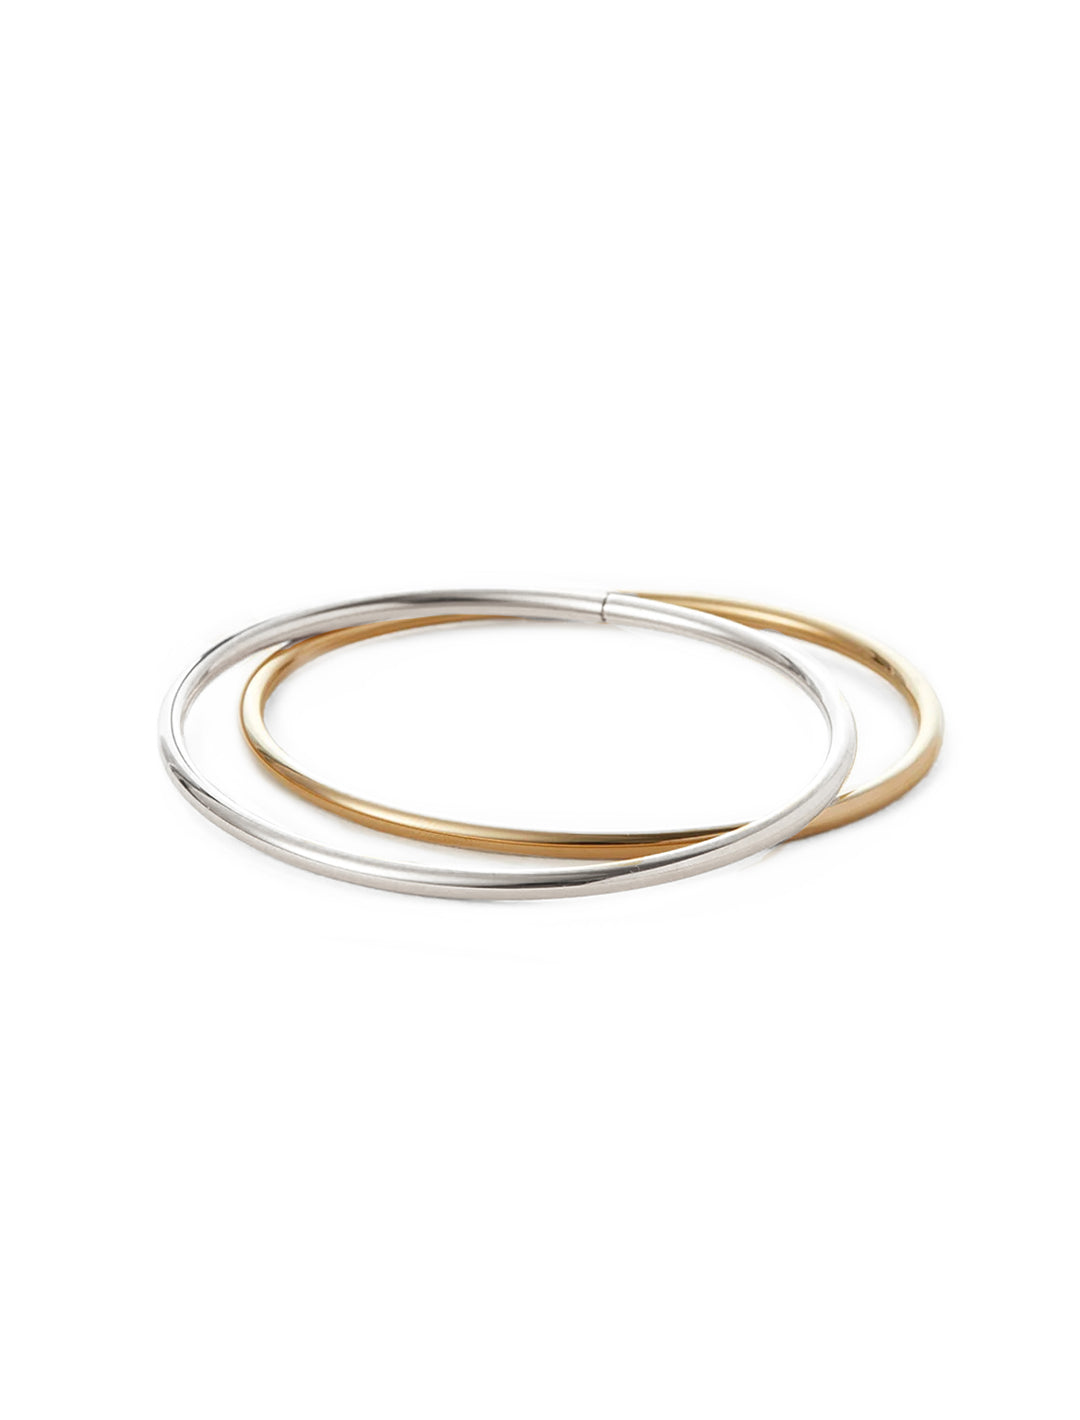 Front view of Jenny Bird's dane bangle set of 2 in two tone.